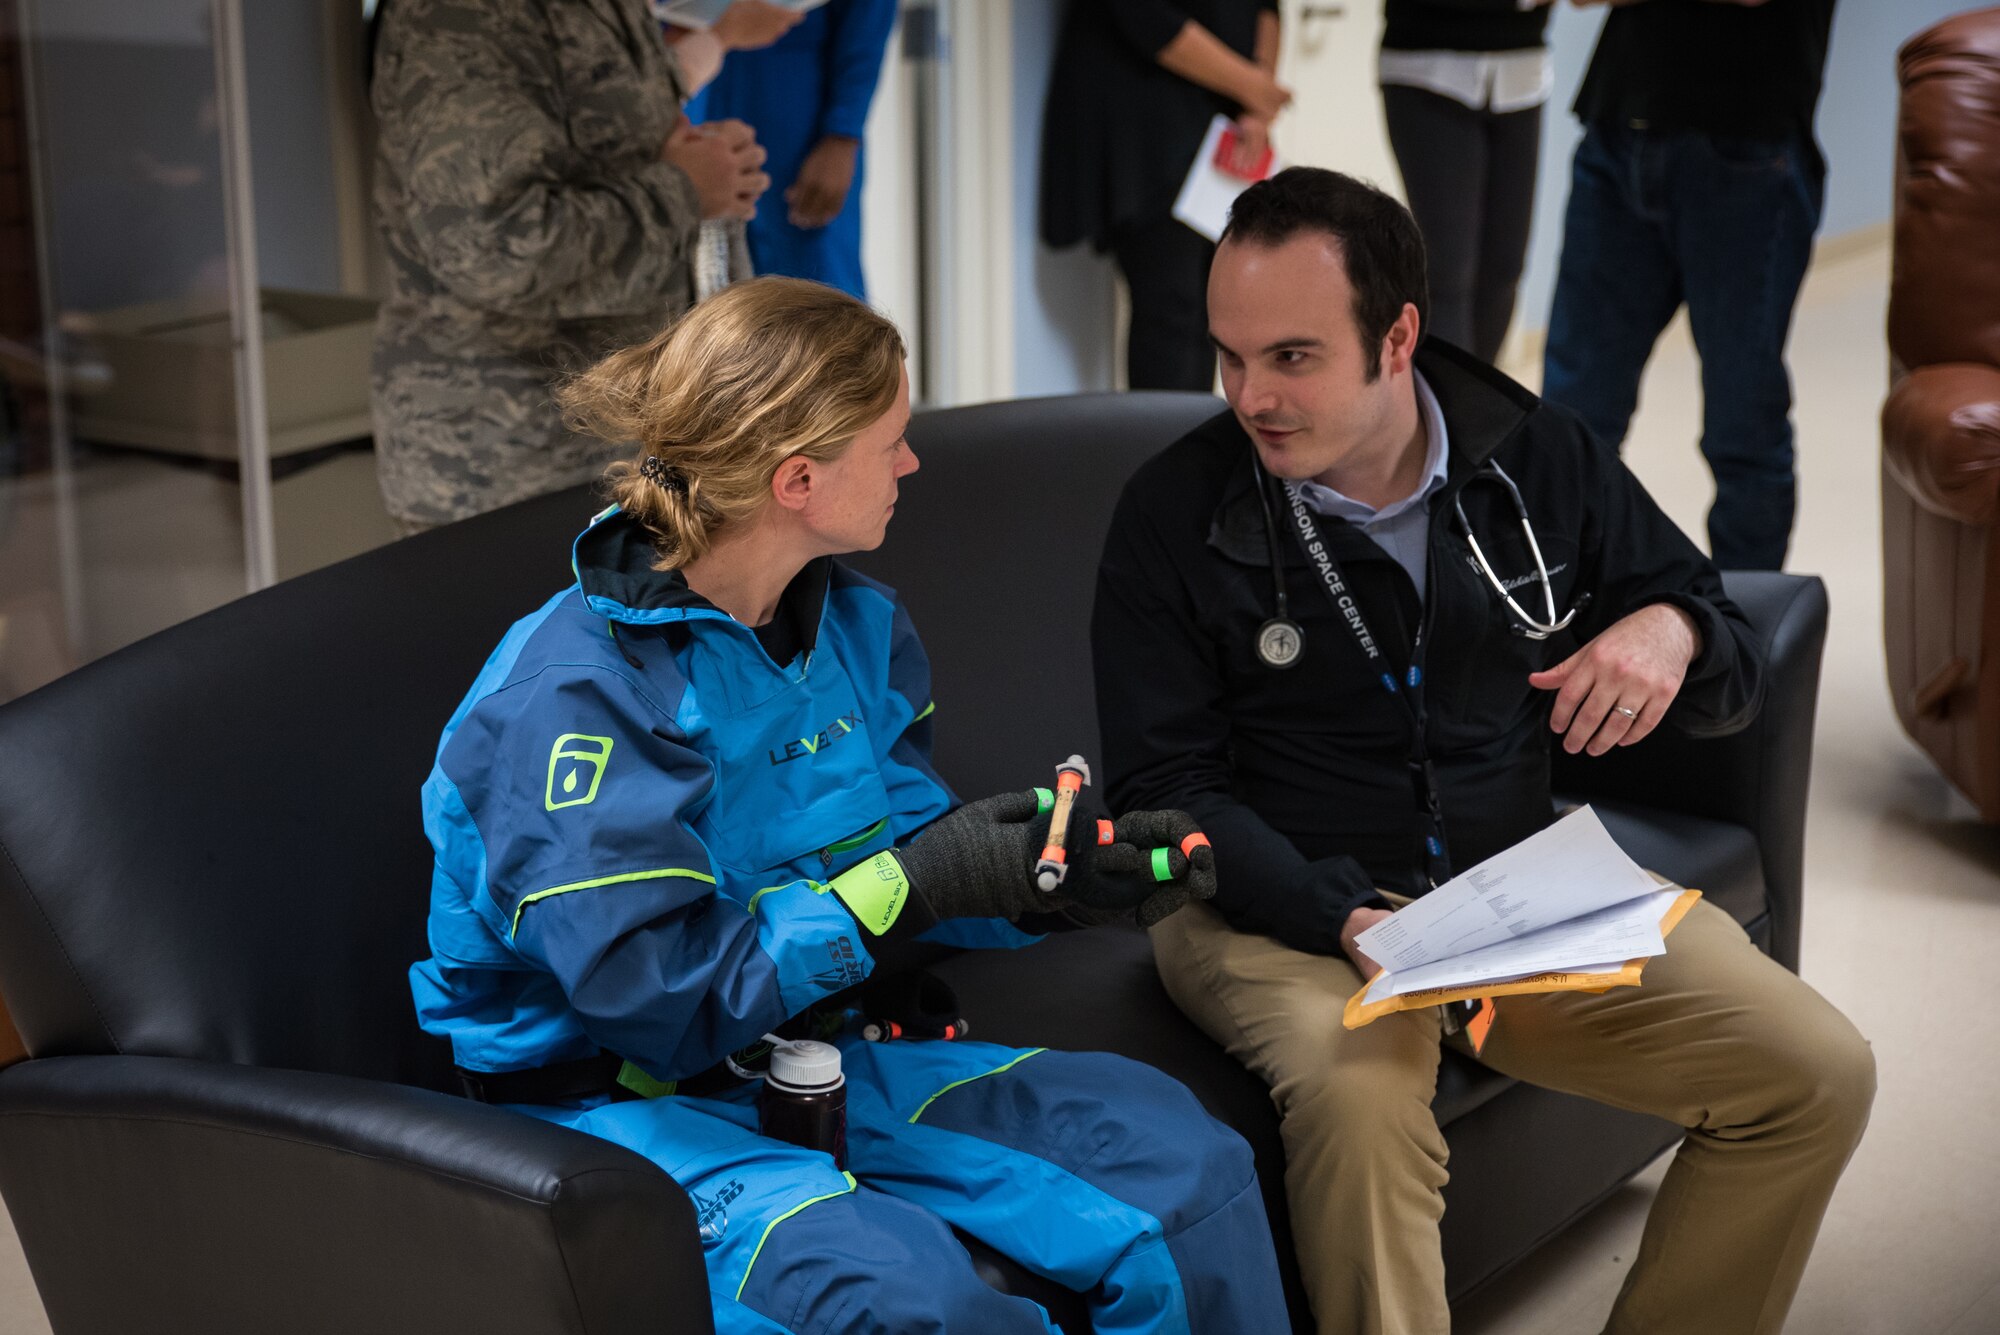 NASA astronaut candidate Zena Cardman speaks with a NASA physician following her spin in the centrifuge during testing in the Air Force Research Laboratory's 711th Human Performance Wing Nov. 1 and 2.